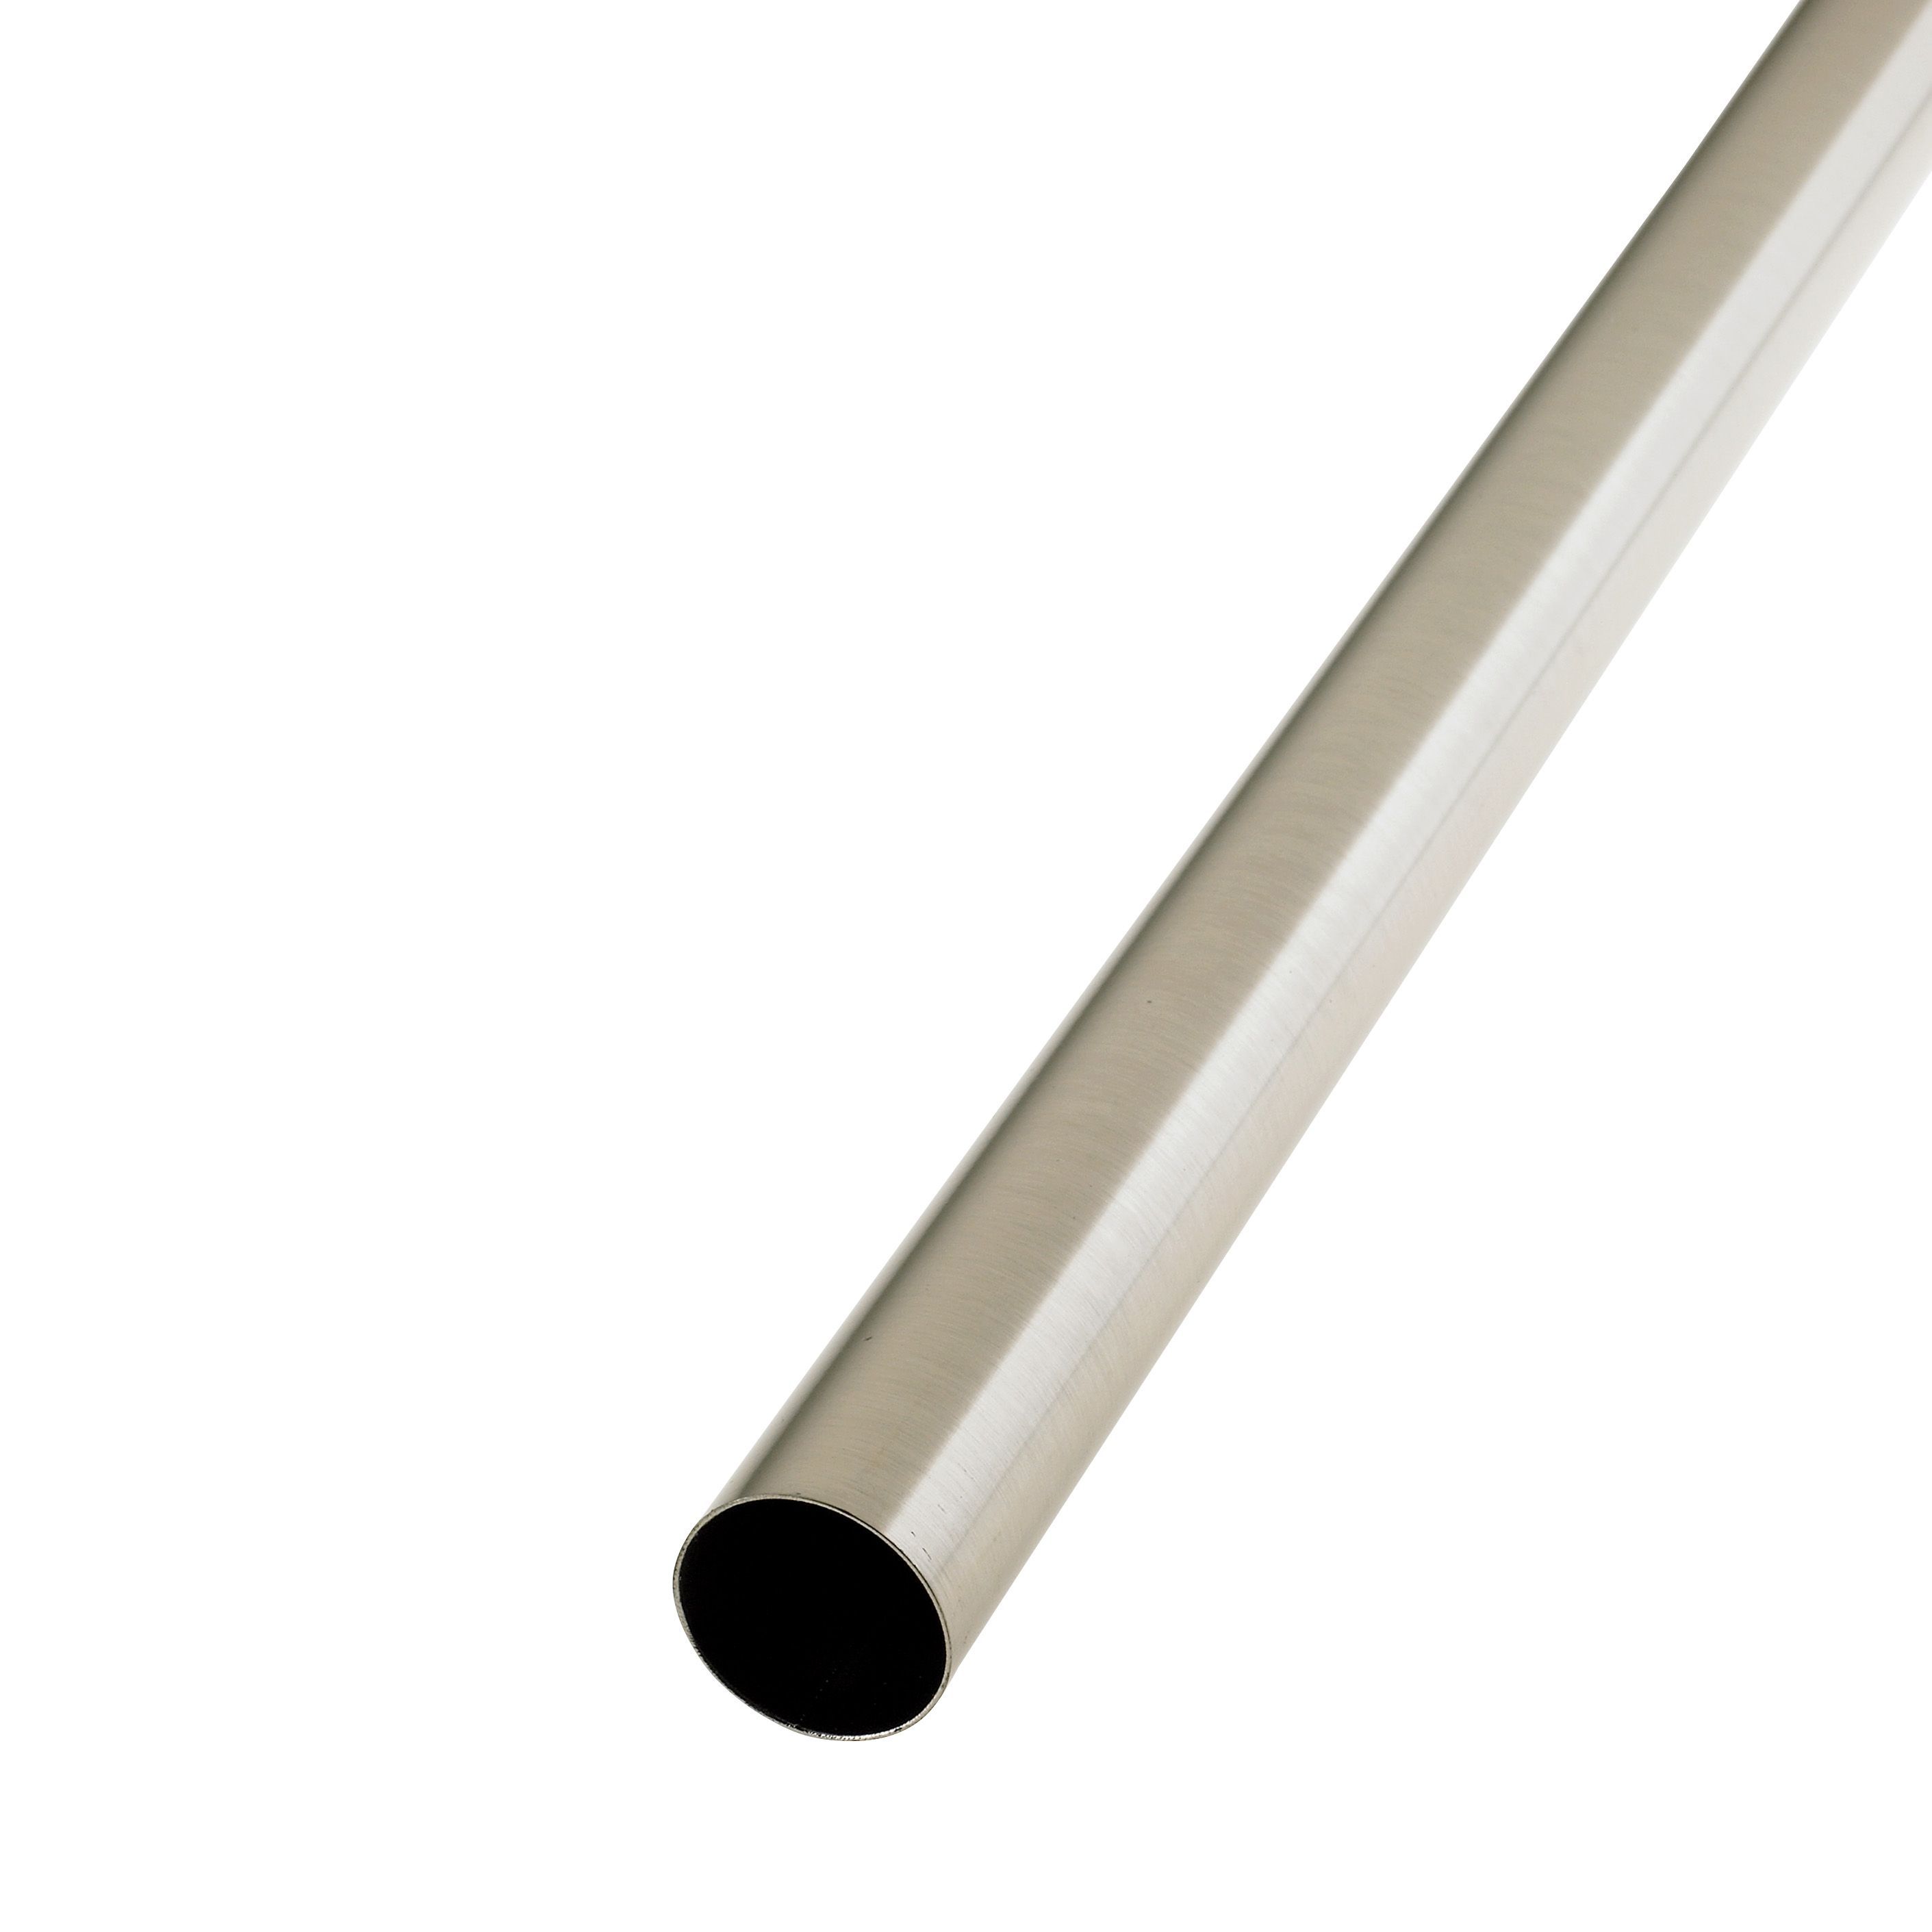 Colorail Brushed Stainless steel Round Tube, (L)1.83m (Dia)25mm